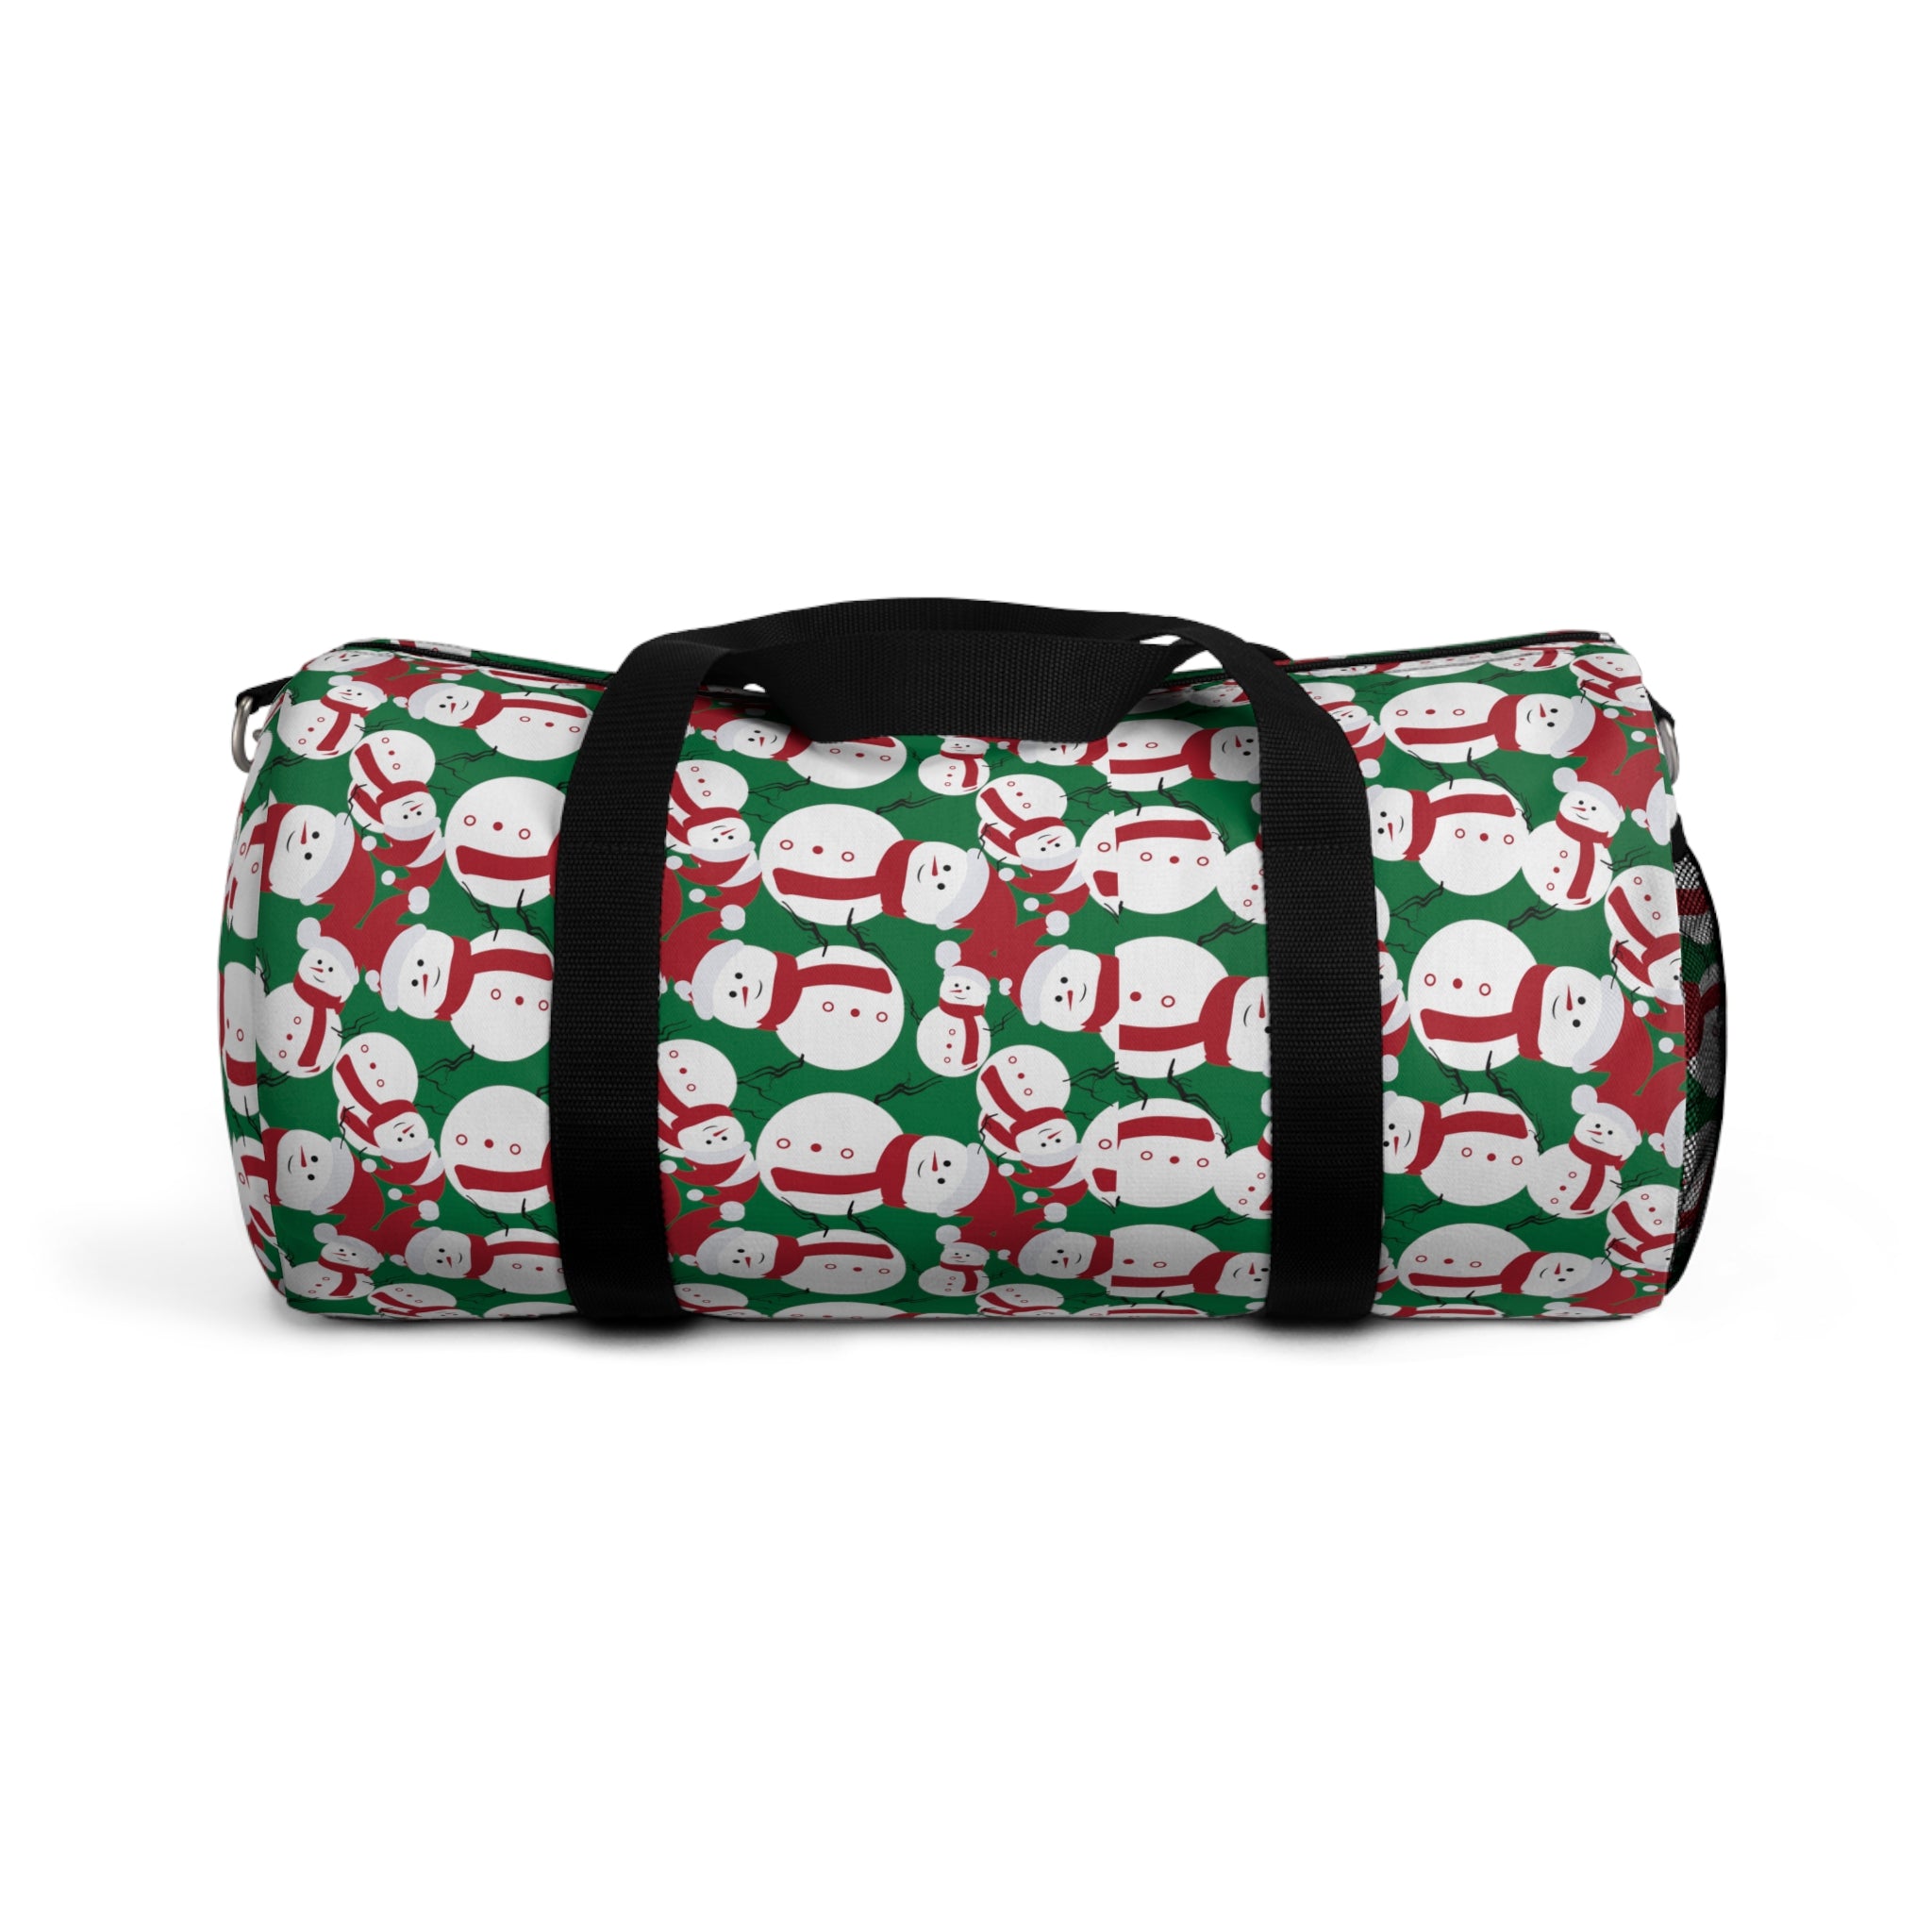 Green Snow Man Duffel Bag, Christmas Snow Man All Day Small Or Large Size Duffel Gym Workout Bag, Made in USA, Small Duffle Bag, Large Duffle Bag, Sports Soft Nylon Duffle Bag Travel Luggage